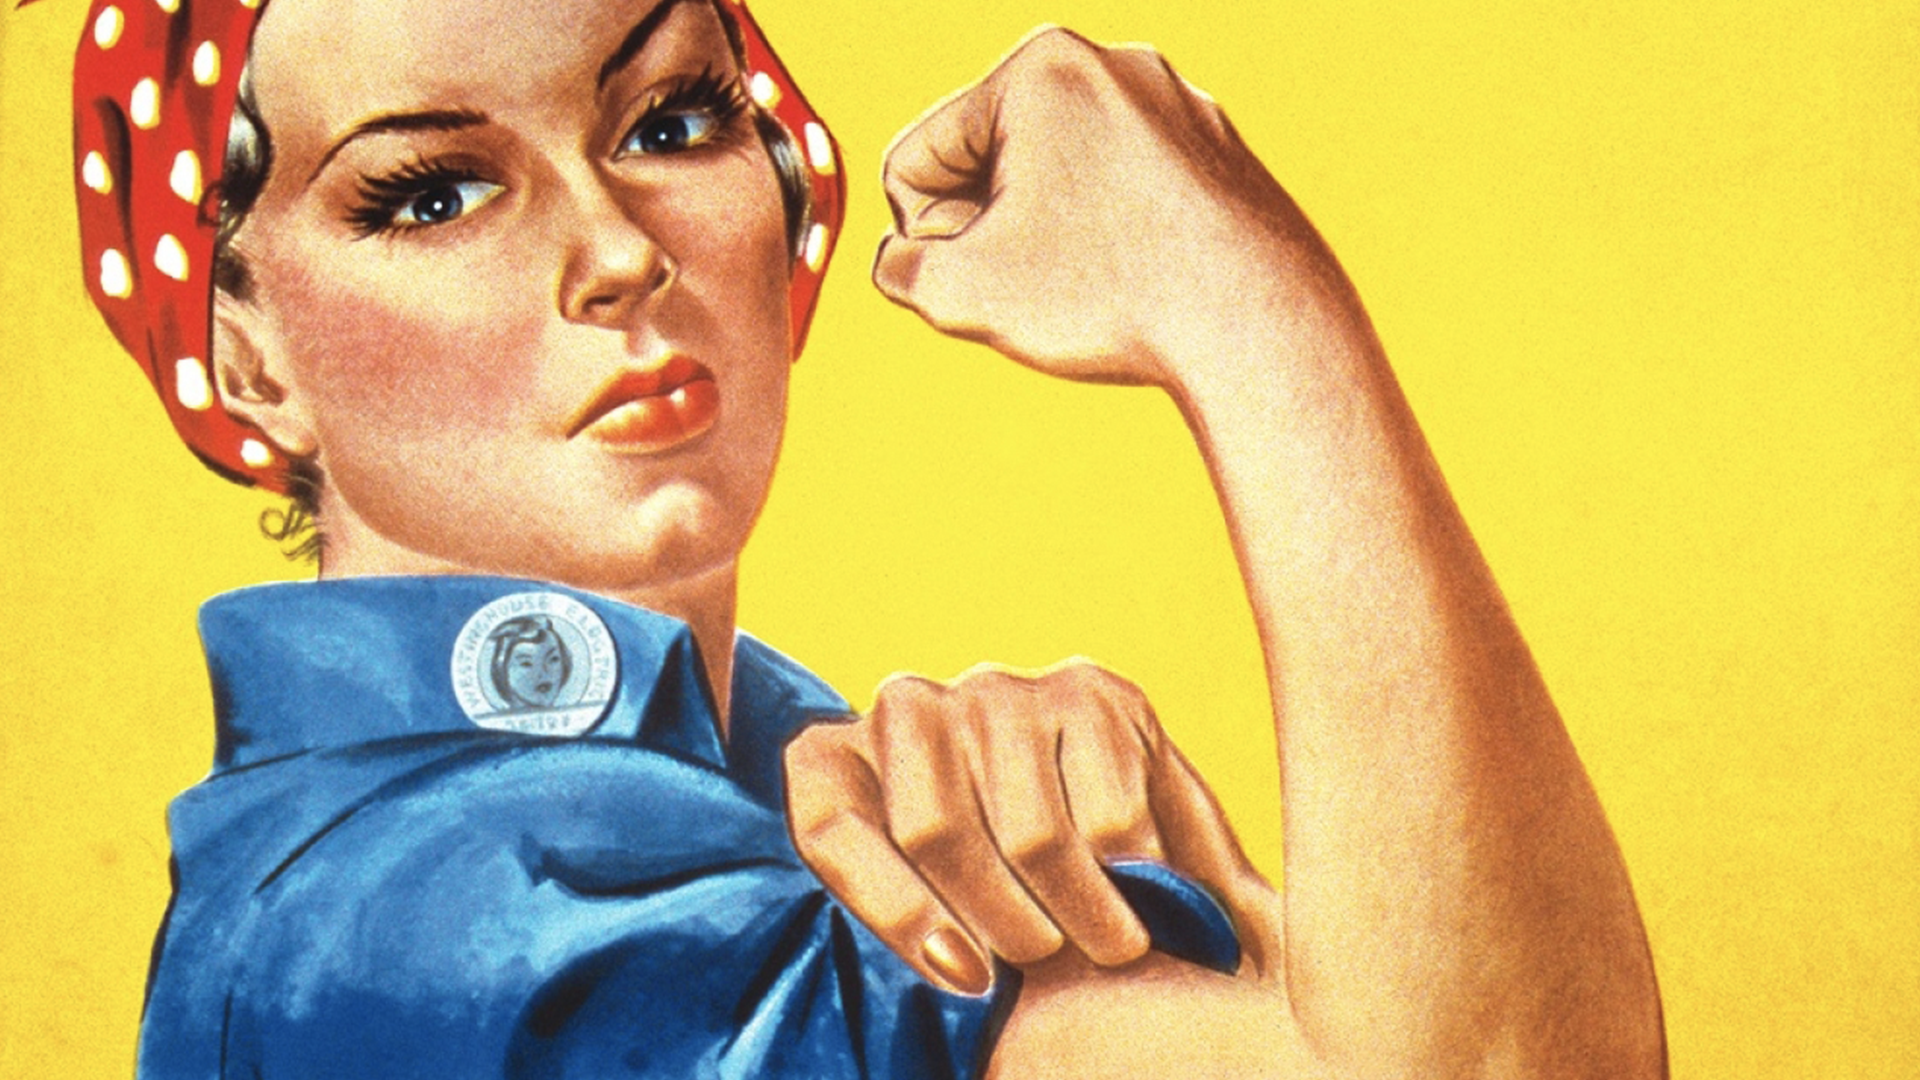 On Labor Day, Let’s Consider a New ‘Woman of Valor’